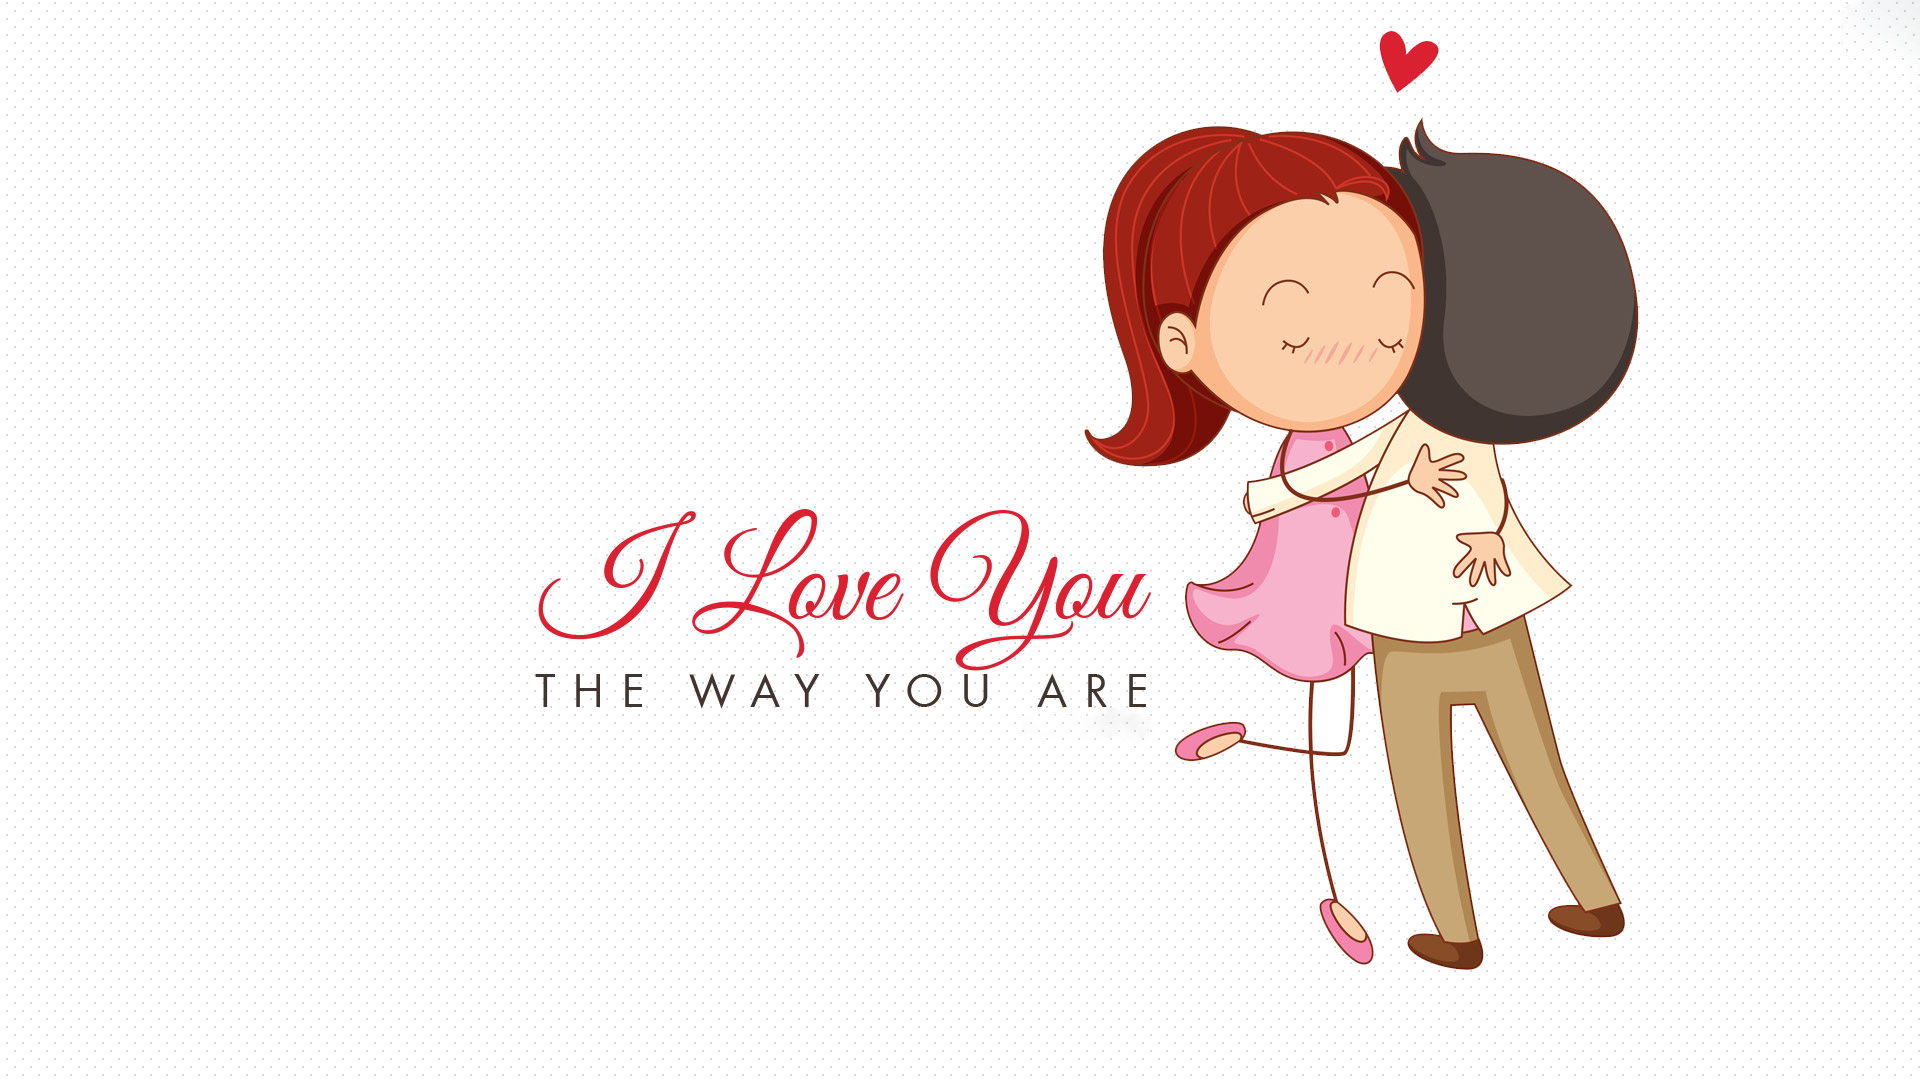 I Love You Background free download